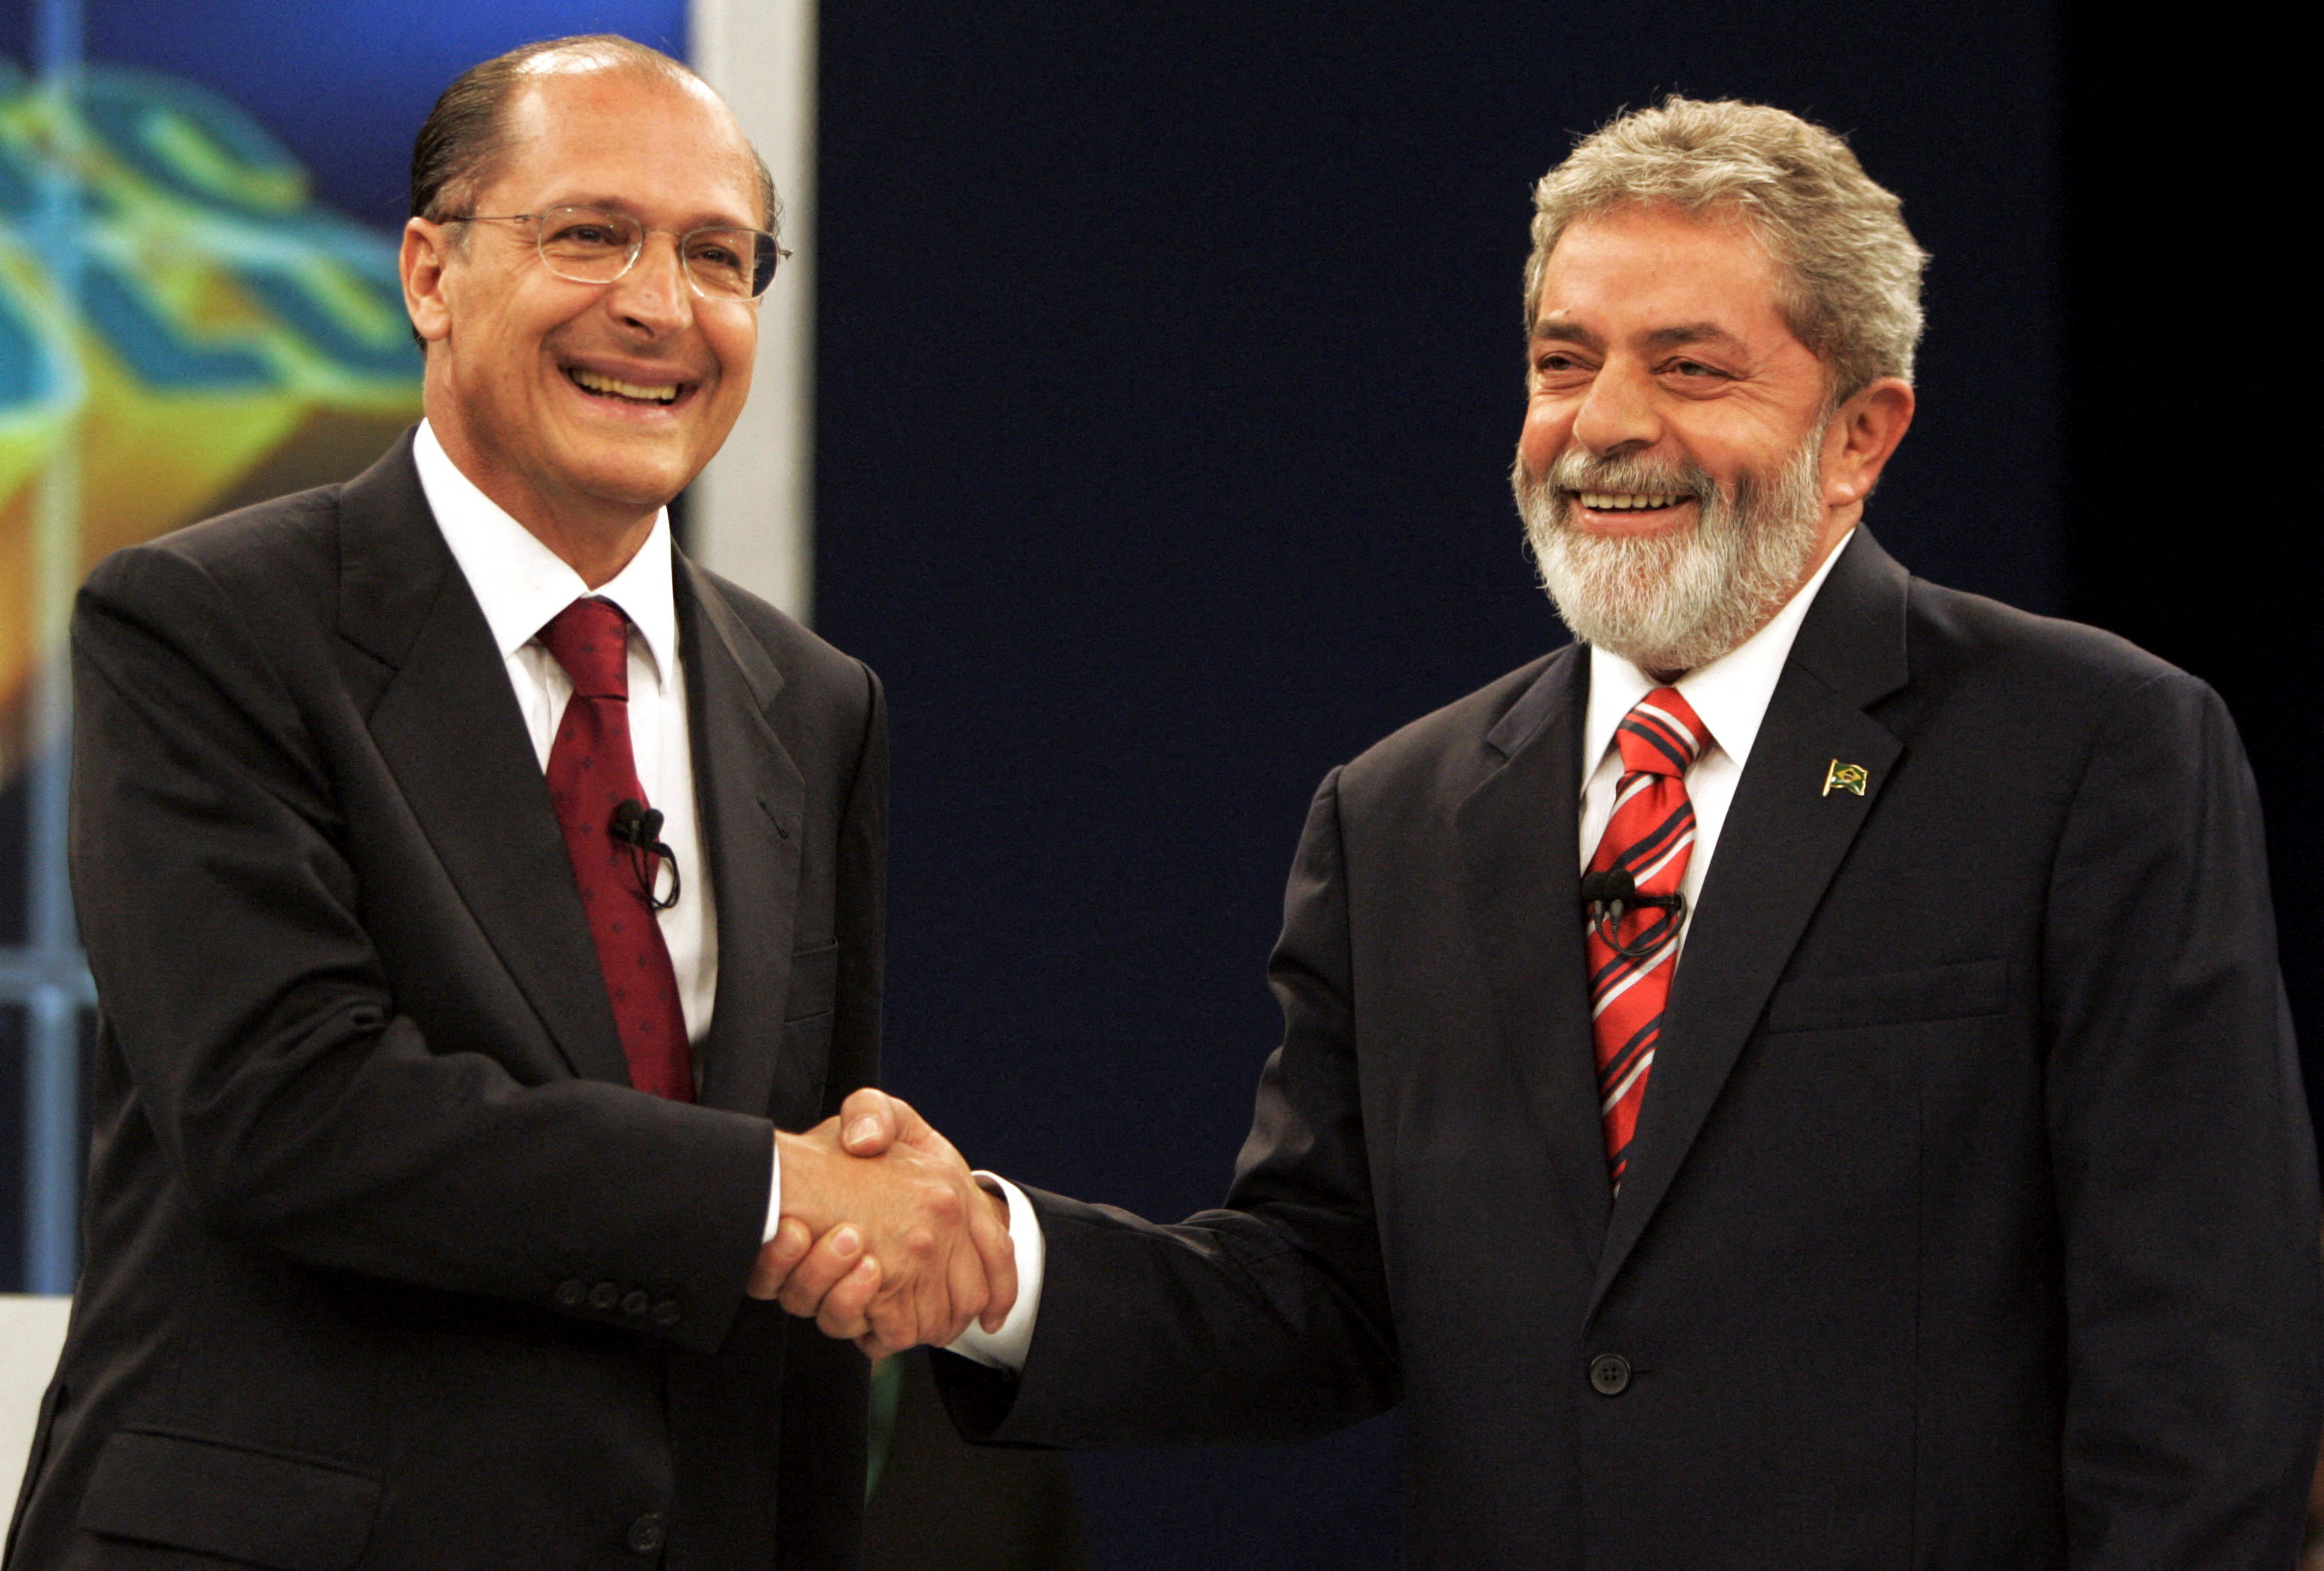 Opposition presidential candidate Alckmin shakes hands with Brazil's President Lula in Rio de Janeiro